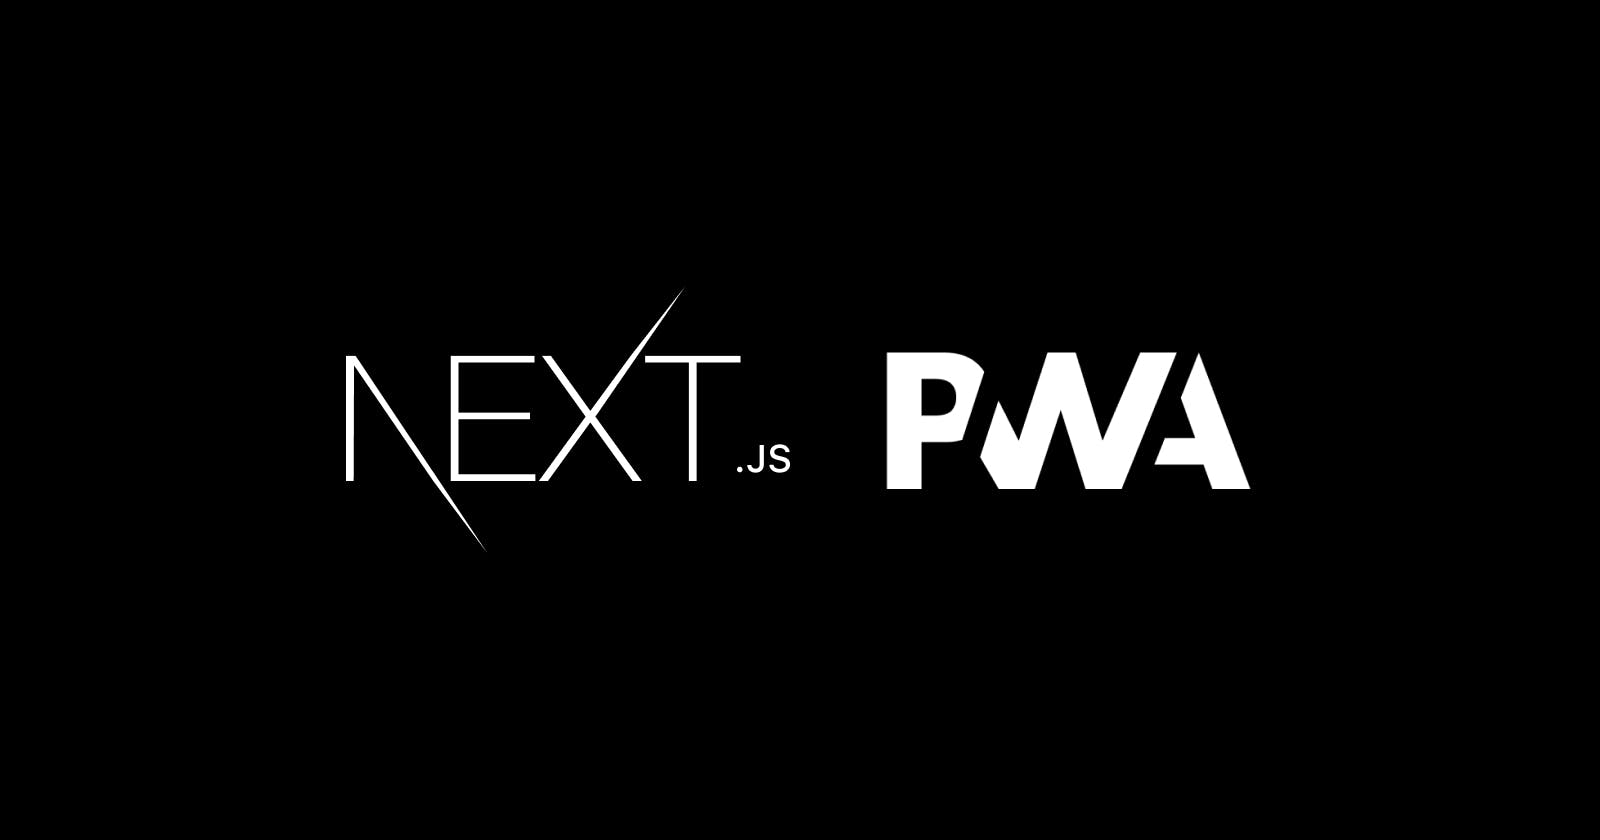 How to add support for PWA in Next JS (App Router)